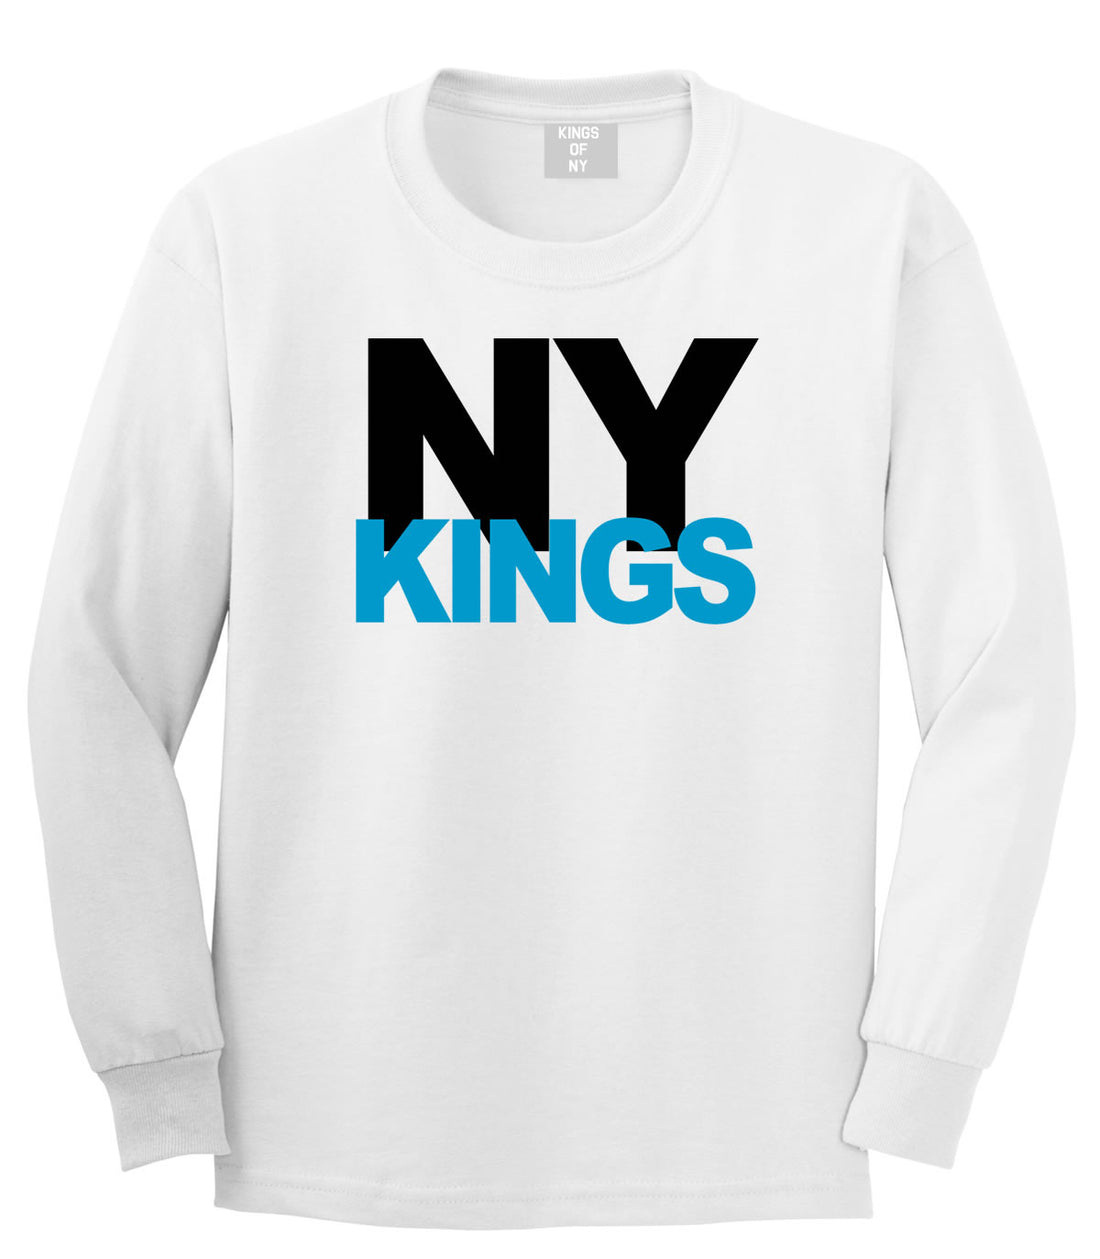 NY Kings Knows Long Sleeve T-Shirt in White By Kings Of NY